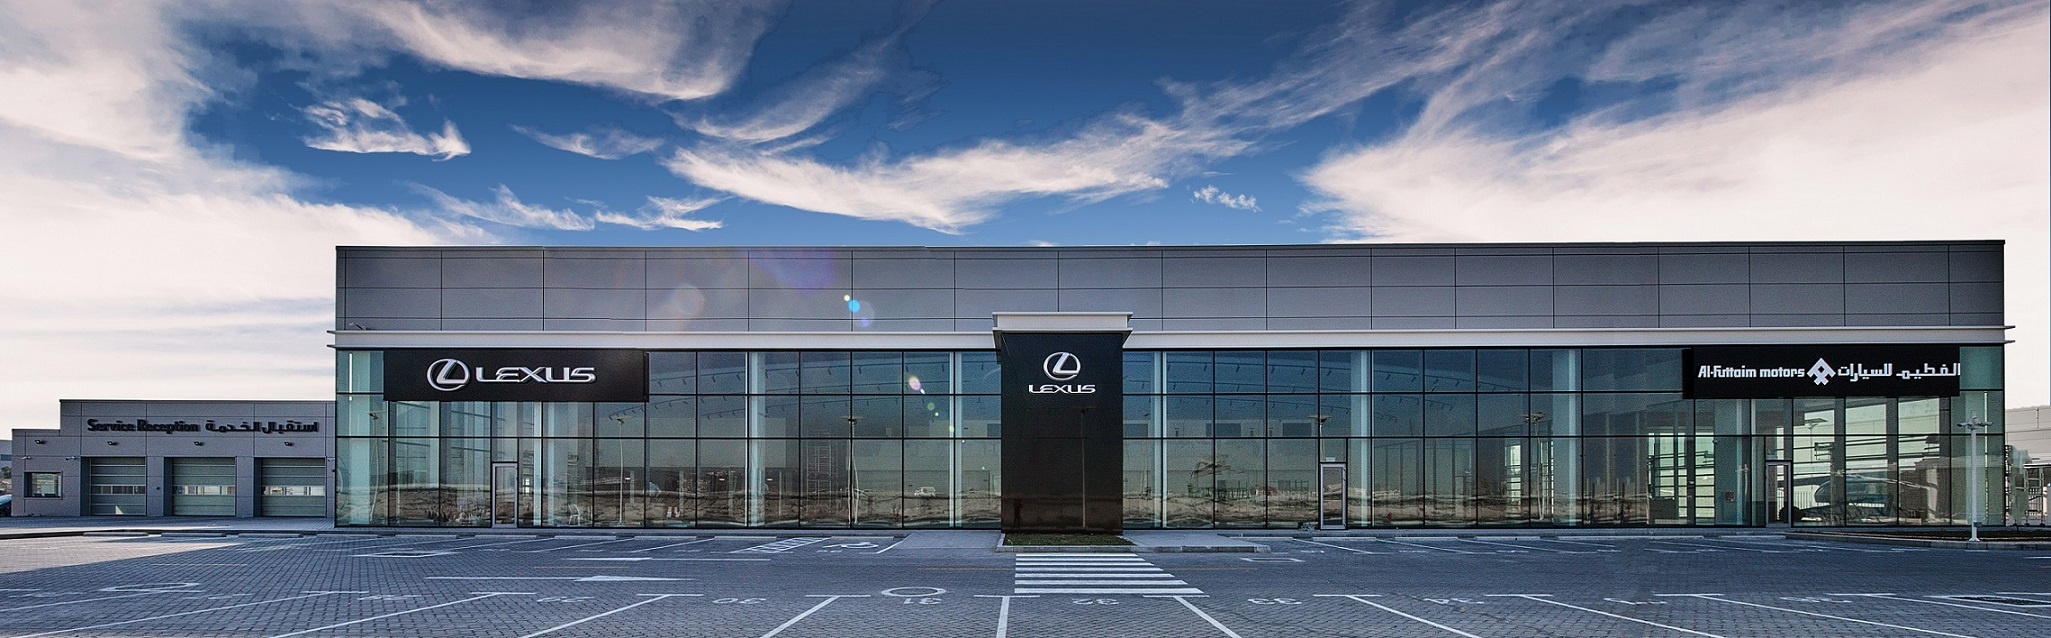 Al-Futtaim Lexus upgrades UAE showrooms with dedicated space for Pre-owned vehicles